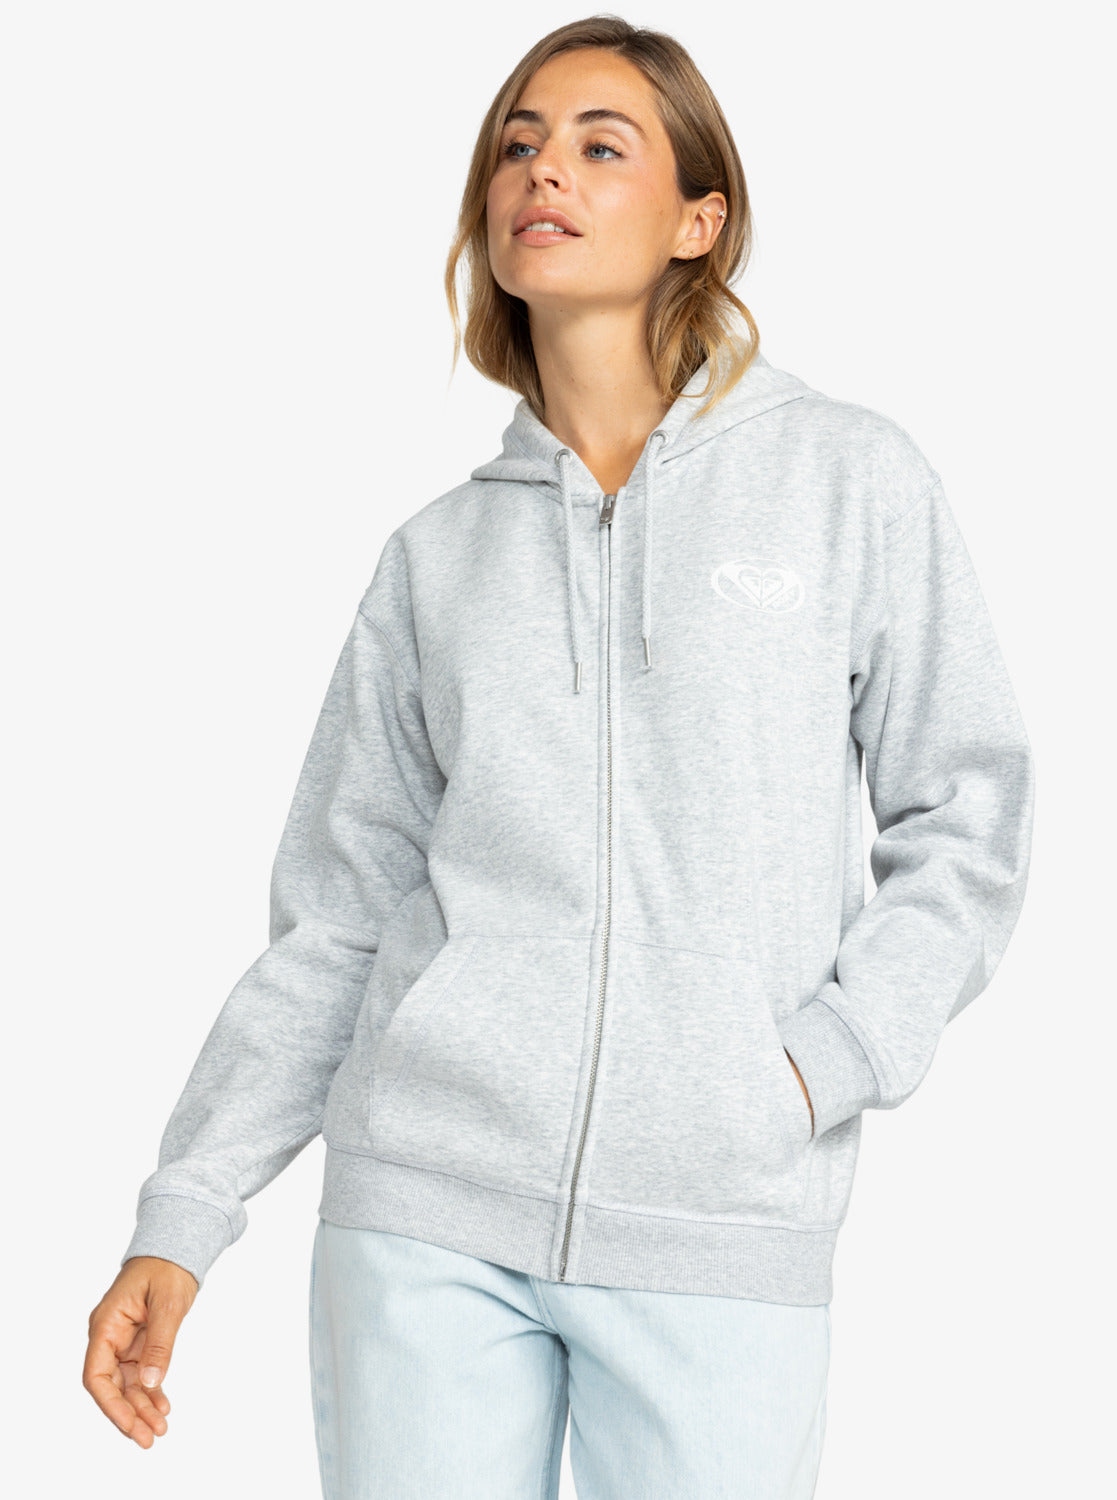 Roxy Surf Stoked Zipped Brushed - Heritage Heather - Star Surf + Skate